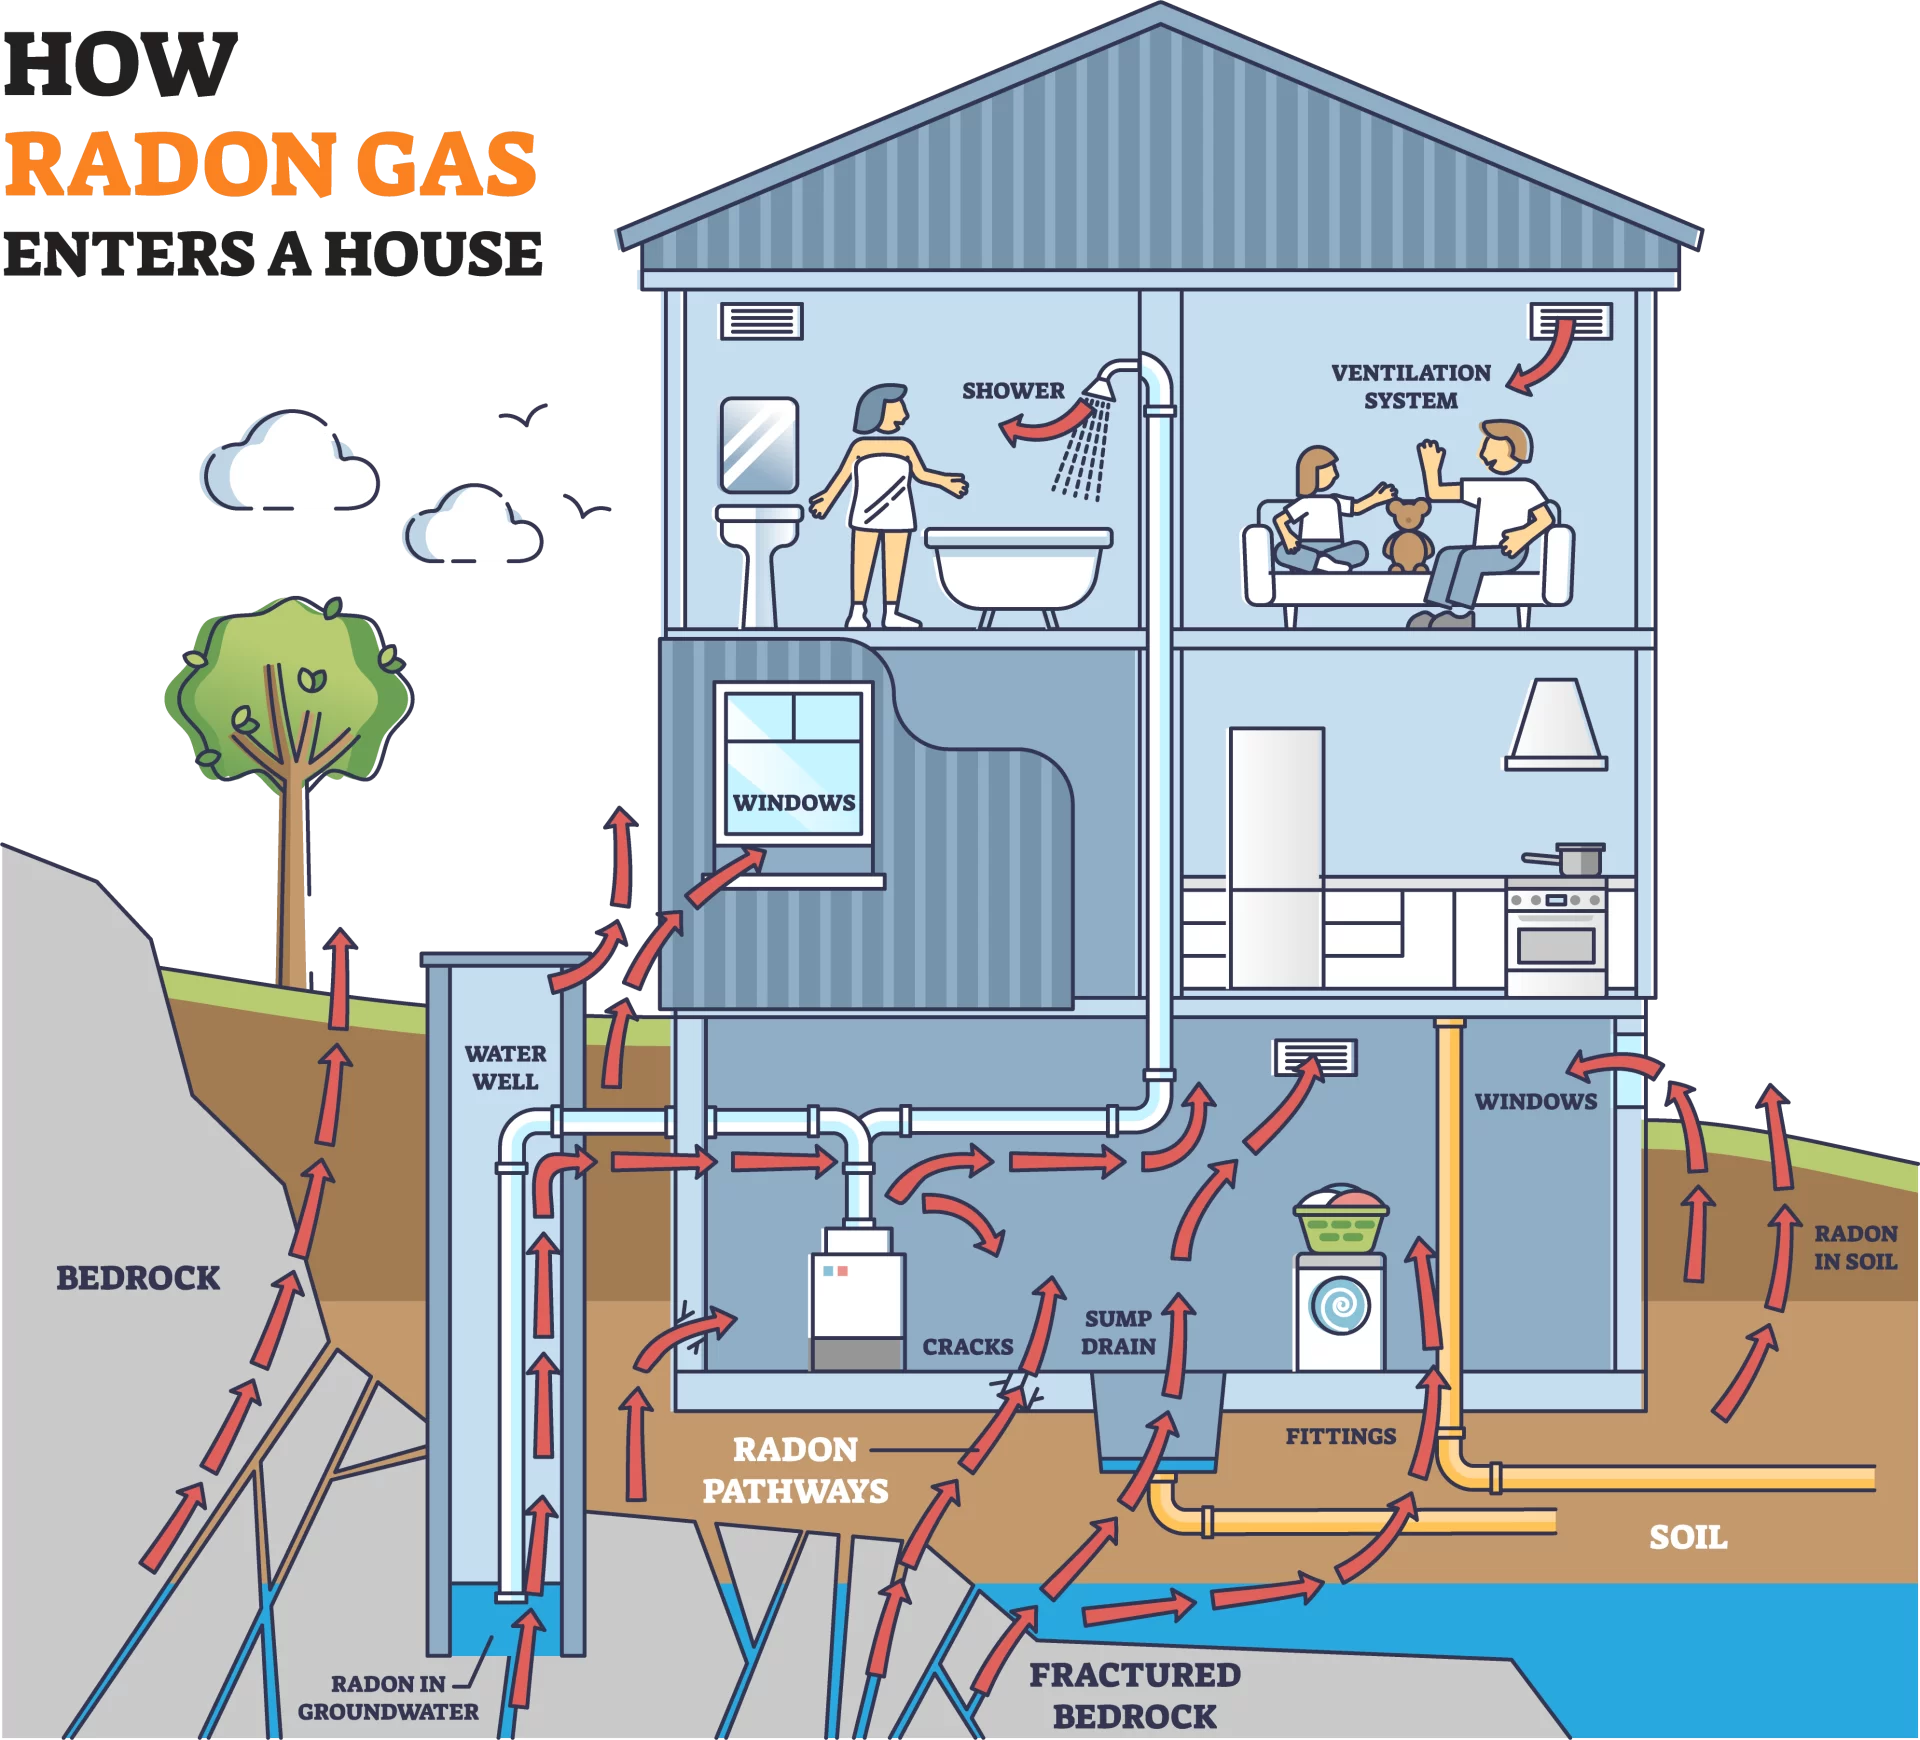 Radon & VOC Testing Services for Homes and Businesses in Fort Lauderdale, Coral Springs, and Pompano Beach, FL